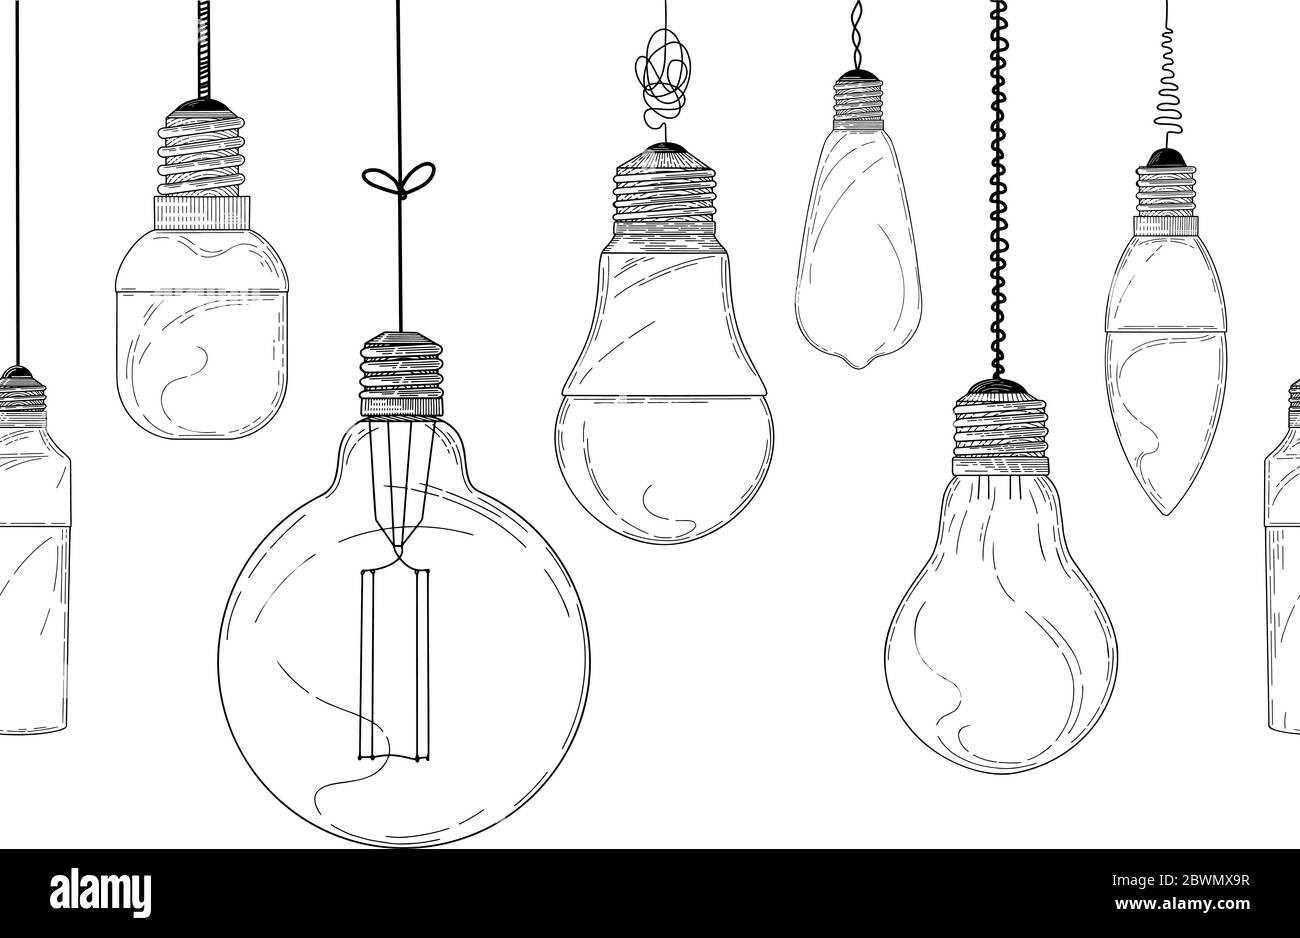 Sketch of hanging light bulbs isolated on a white background. Seamless